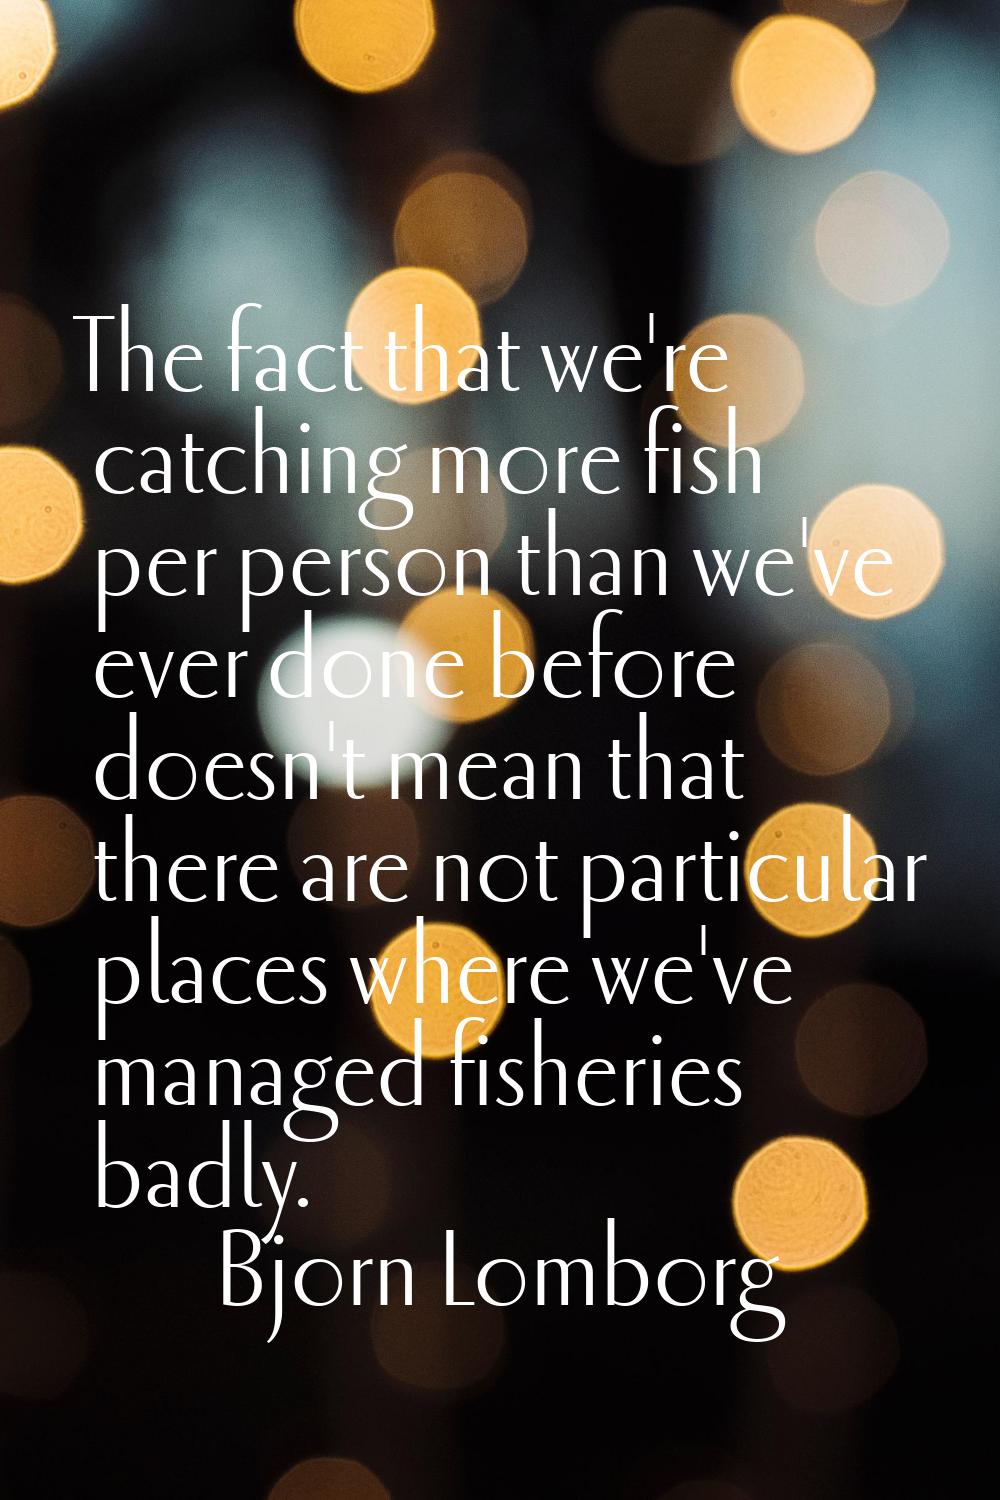 The fact that we're catching more fish per person than we've ever done before doesn't mean that the